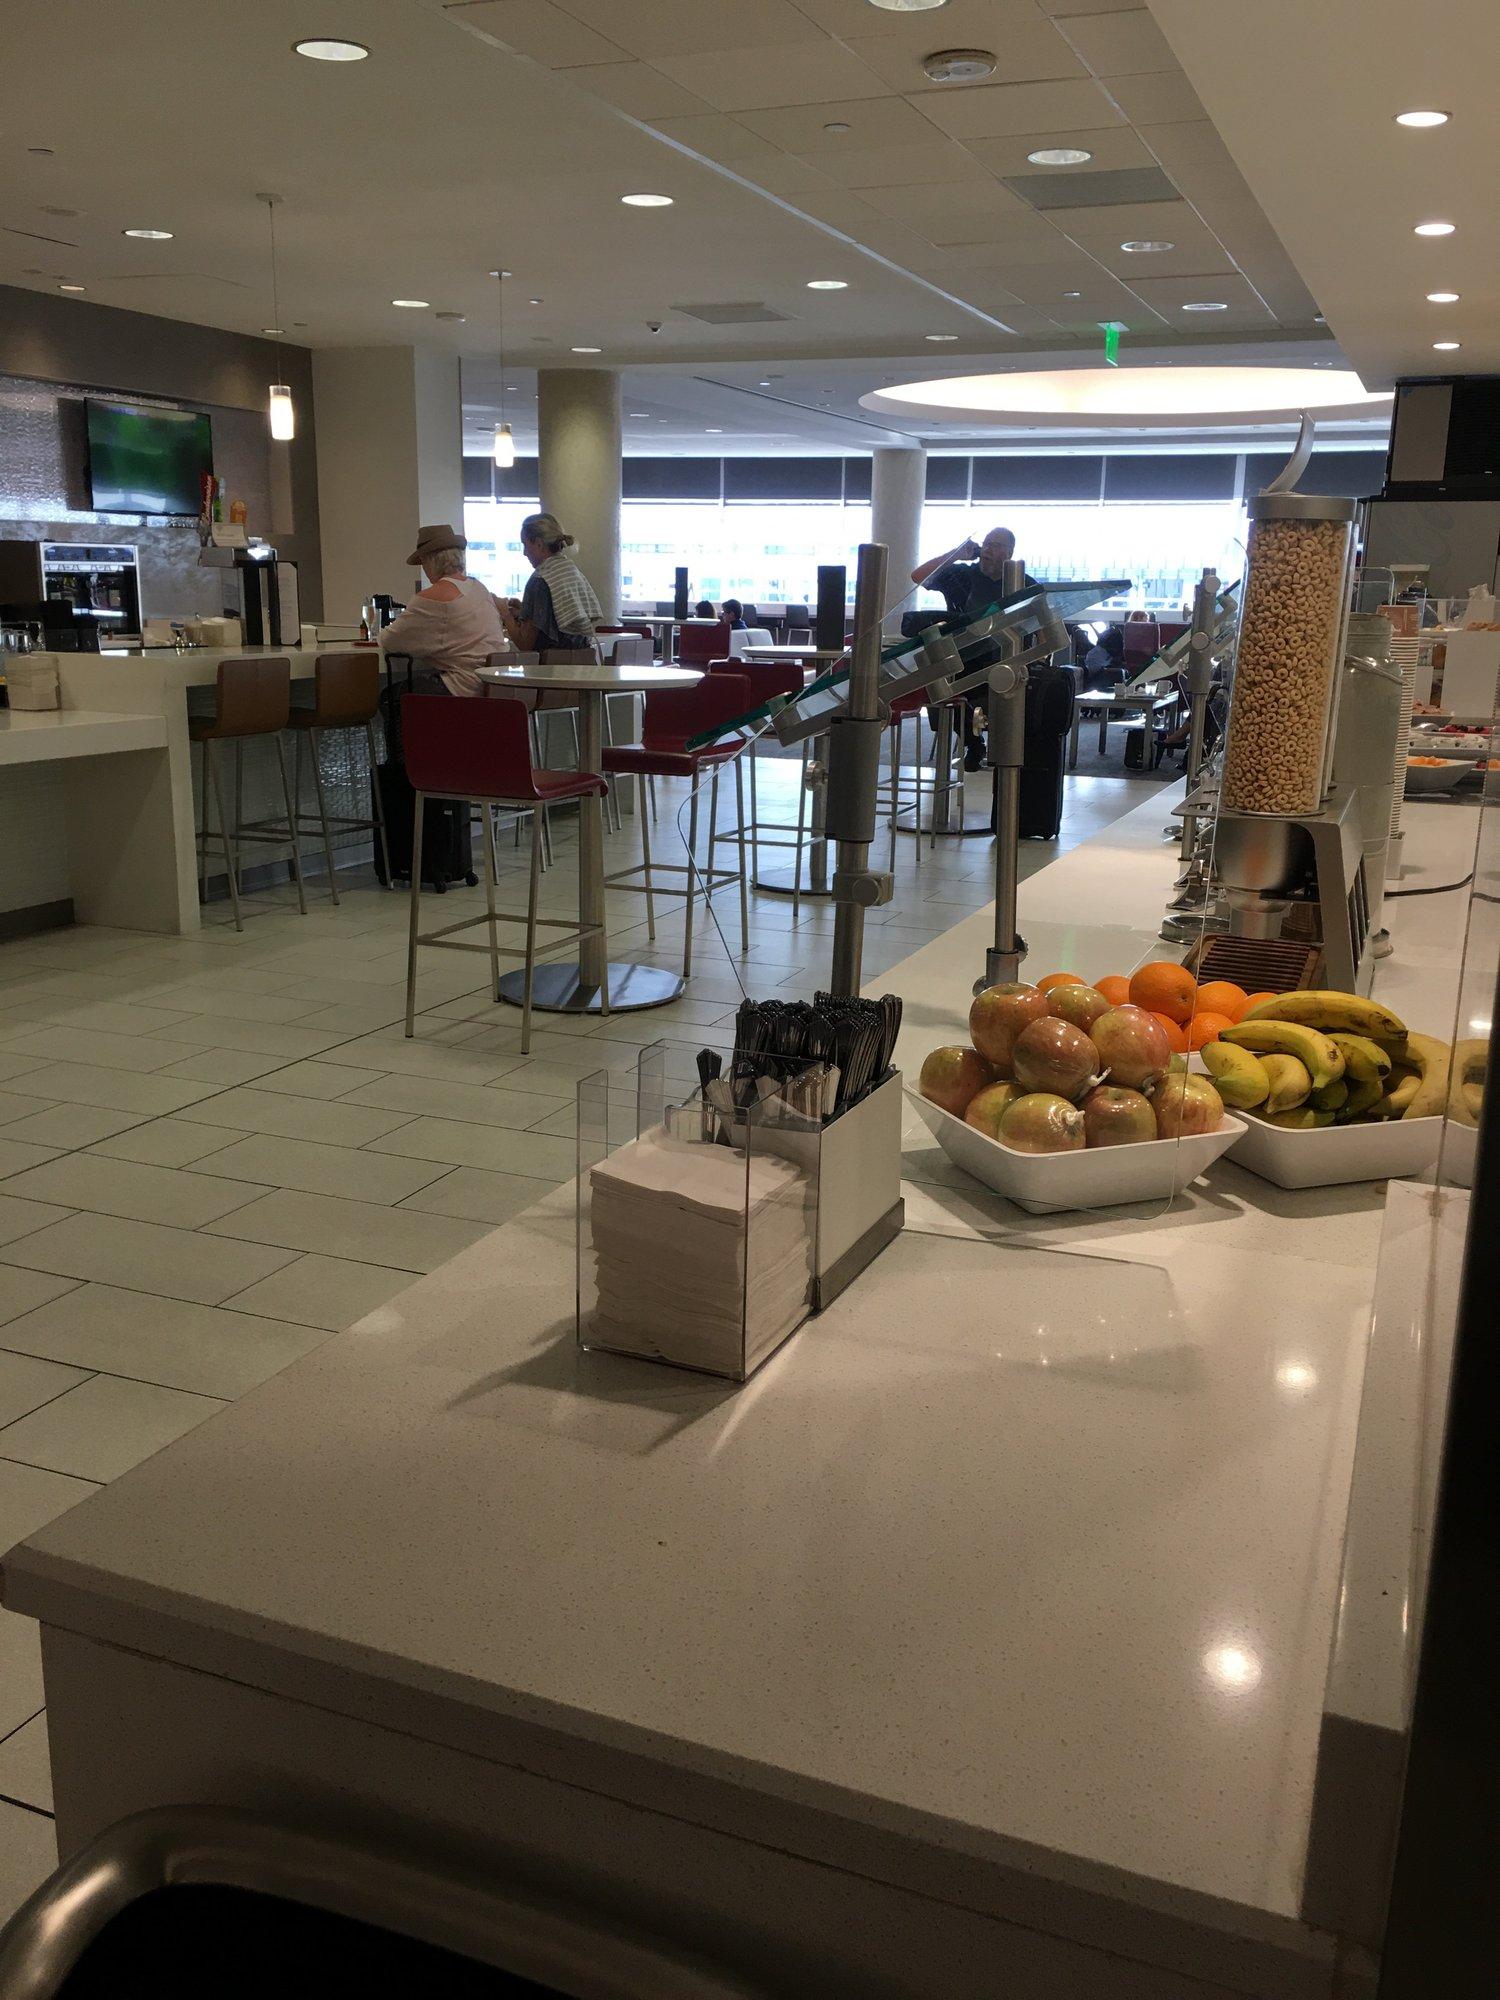 American Airlines Admirals Club image 25 of 38